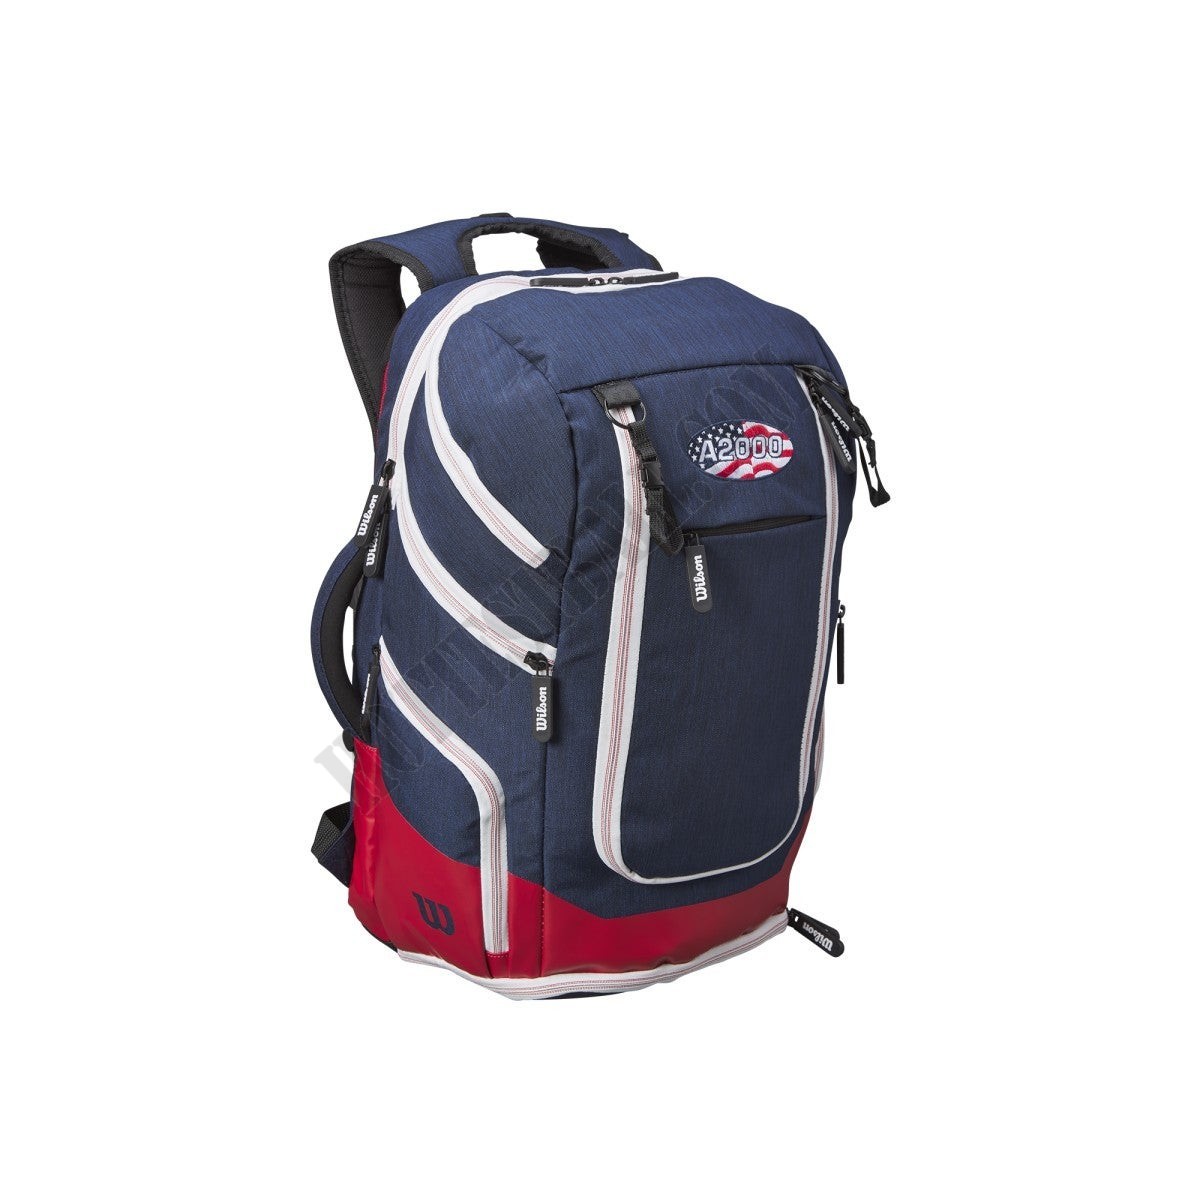 Wilson A2000 Backpack - Wilson Discount Store - -19